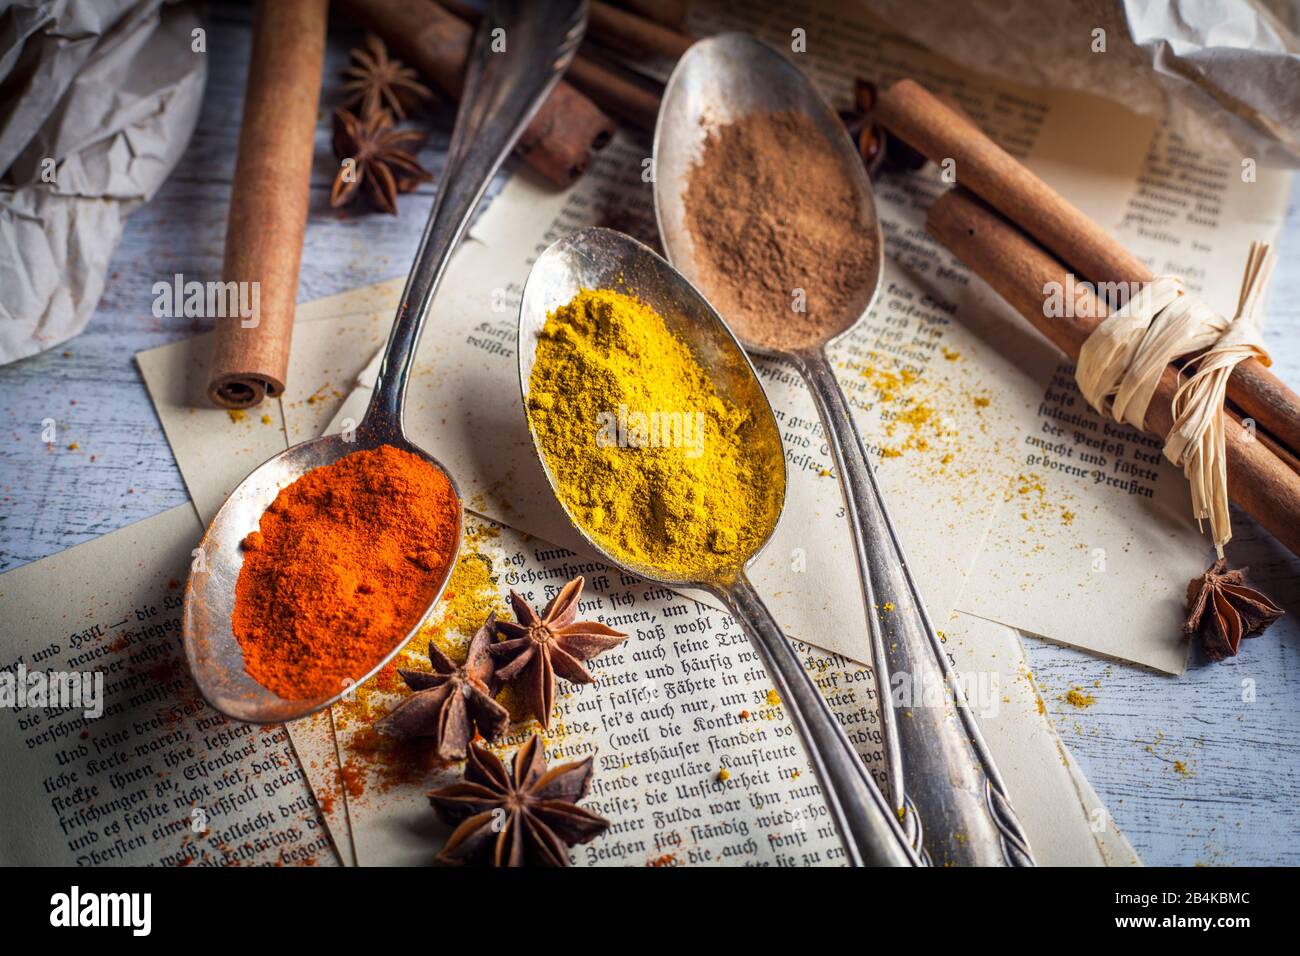 Spoon with spices, anise and cinnamon on old book pages Stock Photo